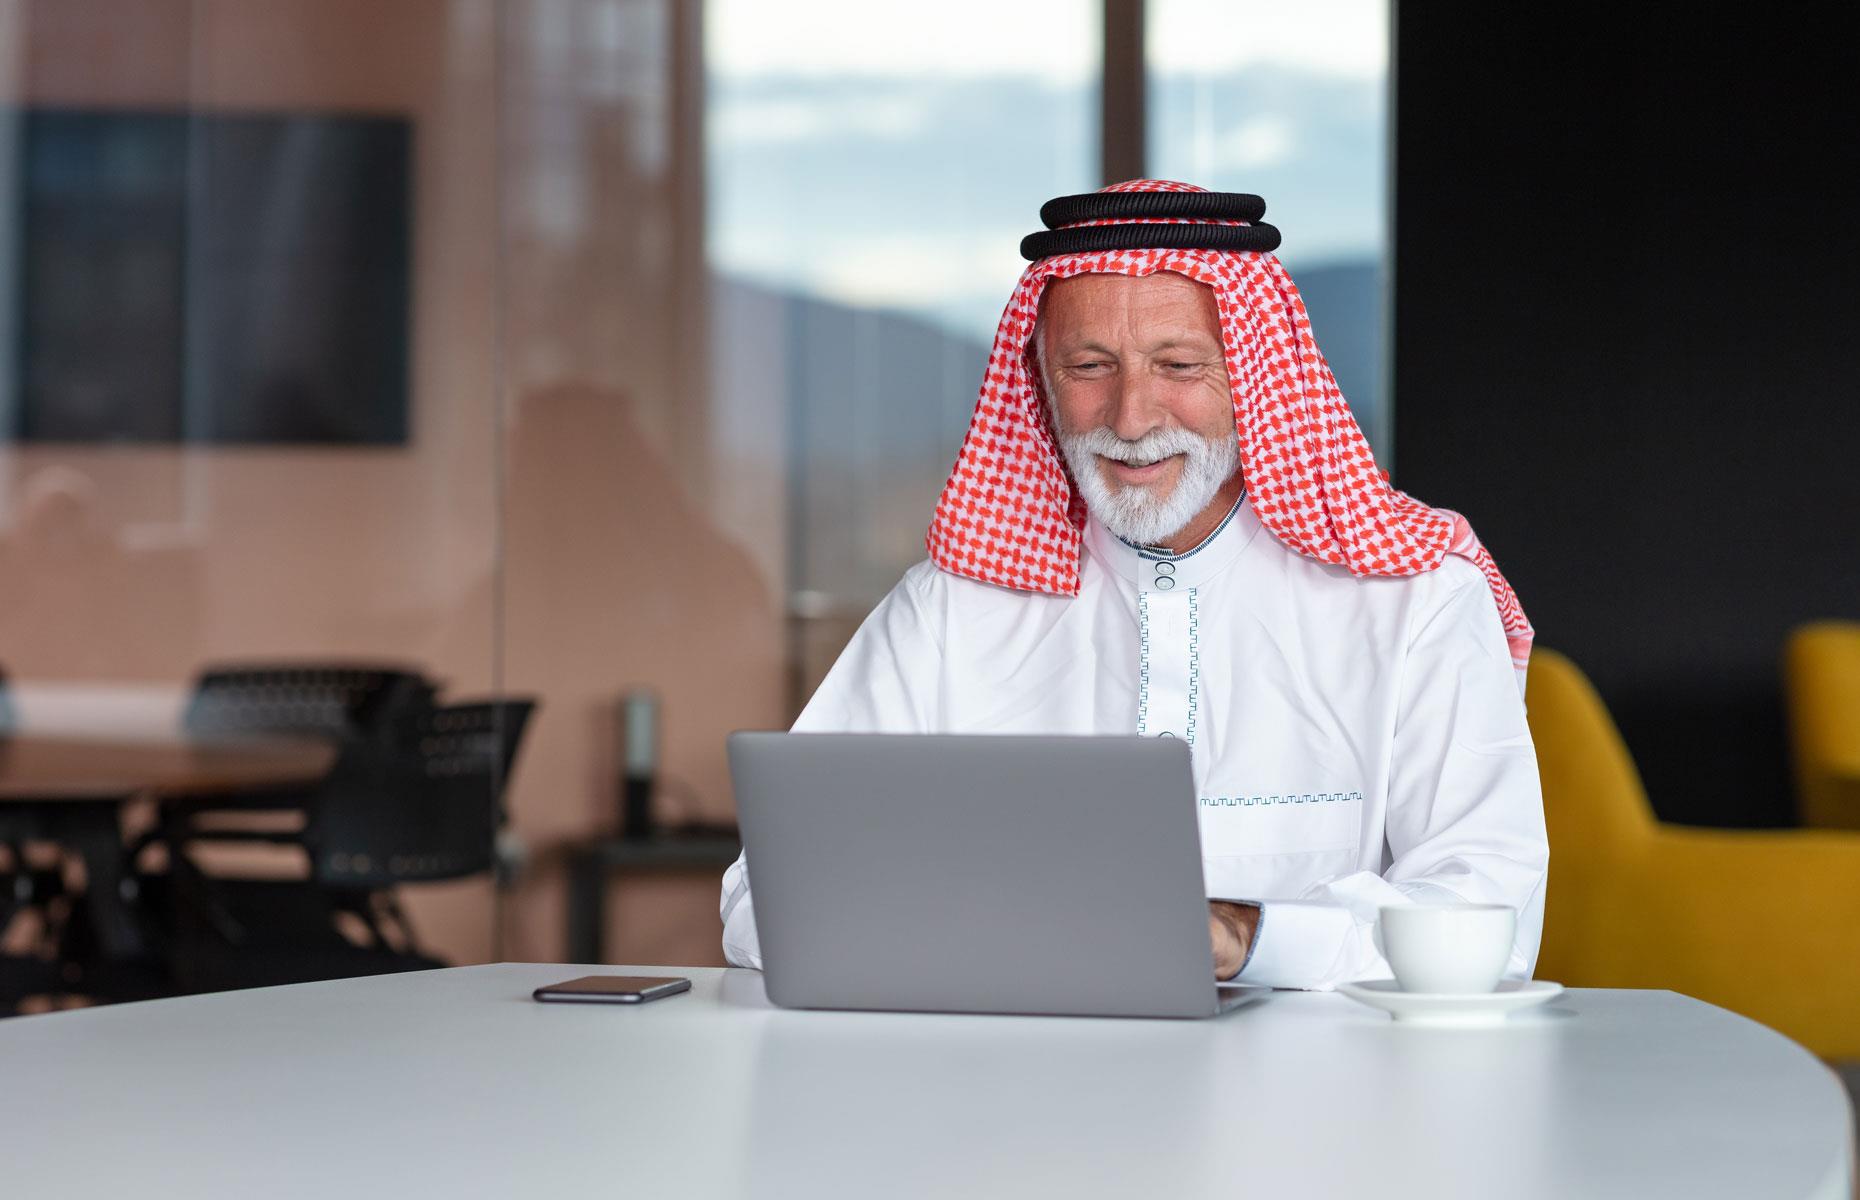 <p>Like neighboring Saudi Arabia, the UAE has seen a dramatic increase in life expectancy since 1950 when the figure was 41.1. It's now grown to 80.5 and is projected to rise to 85 in 2050.</p>  <p>As with Saudi Arabia, the increase in average lifespan in the country has stagnated in recent years despite a superior and free healthcare system for citizens, with experts attributing this to poor lifestyle choices among the general population. To accelerate a life expectancy increase in the nation, more emphasis is needed on educating the public about the risks of sedentary behaviours, poor diets, and other lifestyle factors.</p>